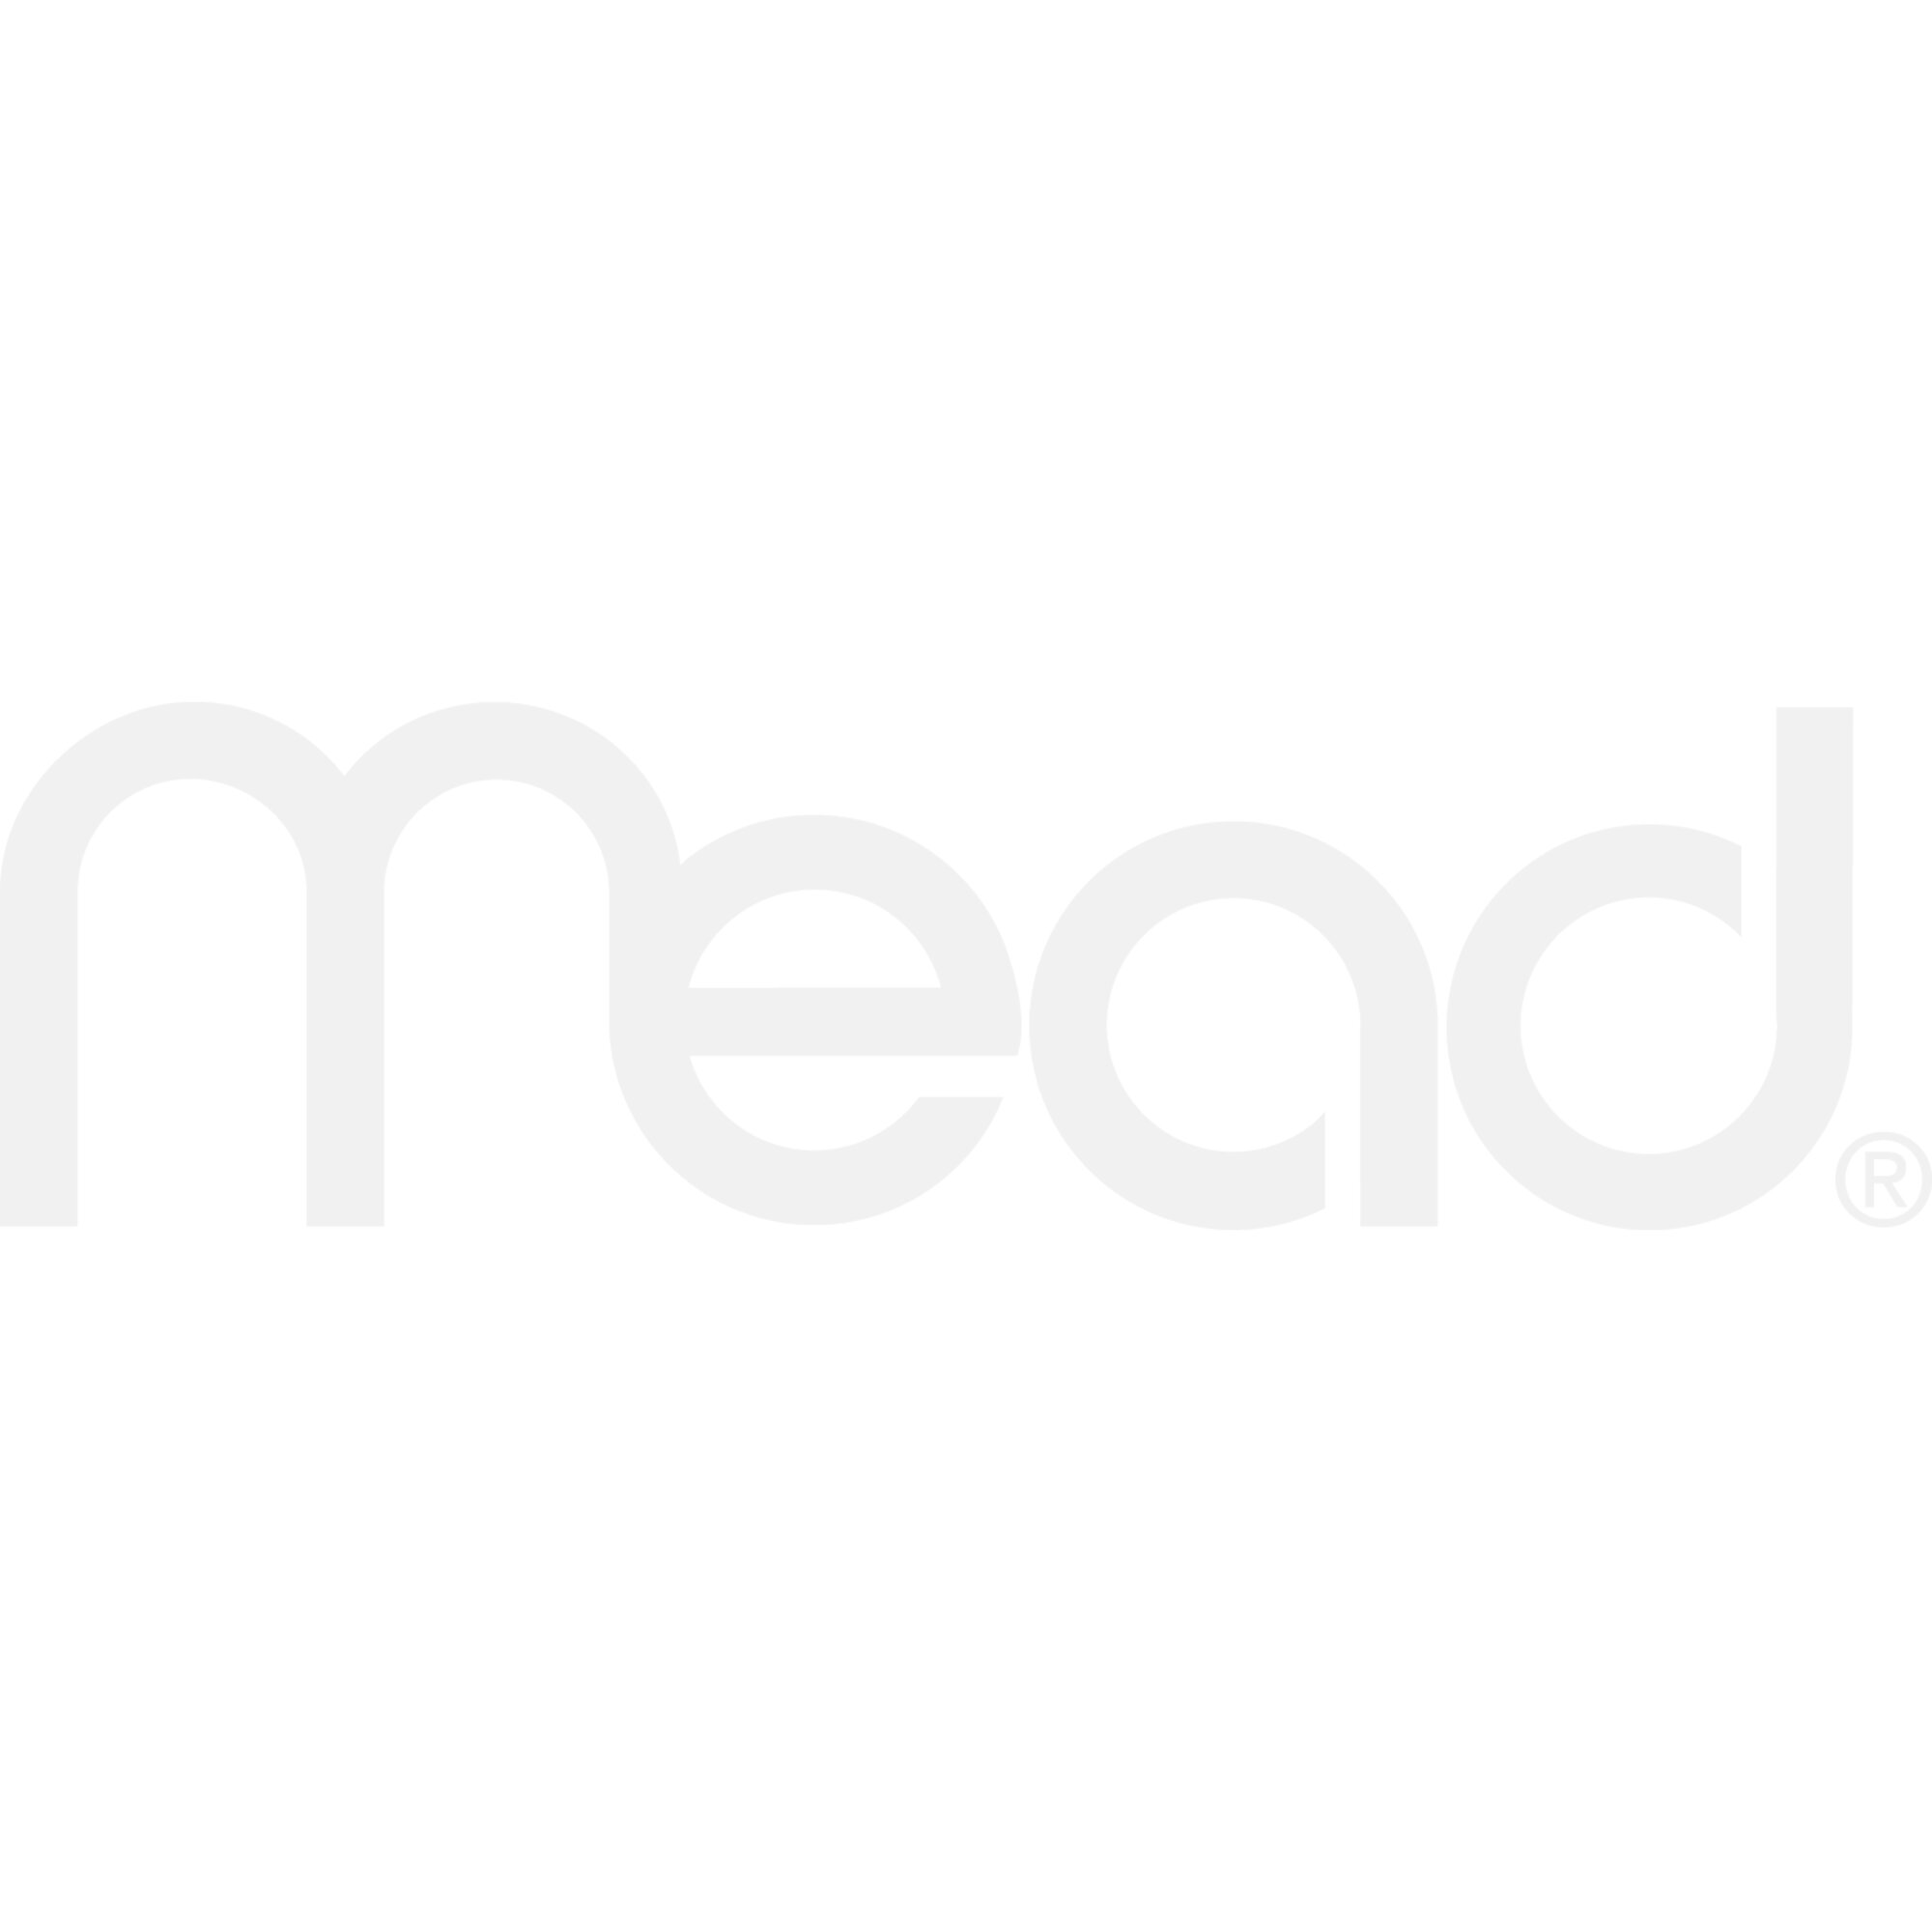 Mead Filler Paper Wide Ruled 10 12 x 8 200 SheetsPack - Paper - image 1 of 3